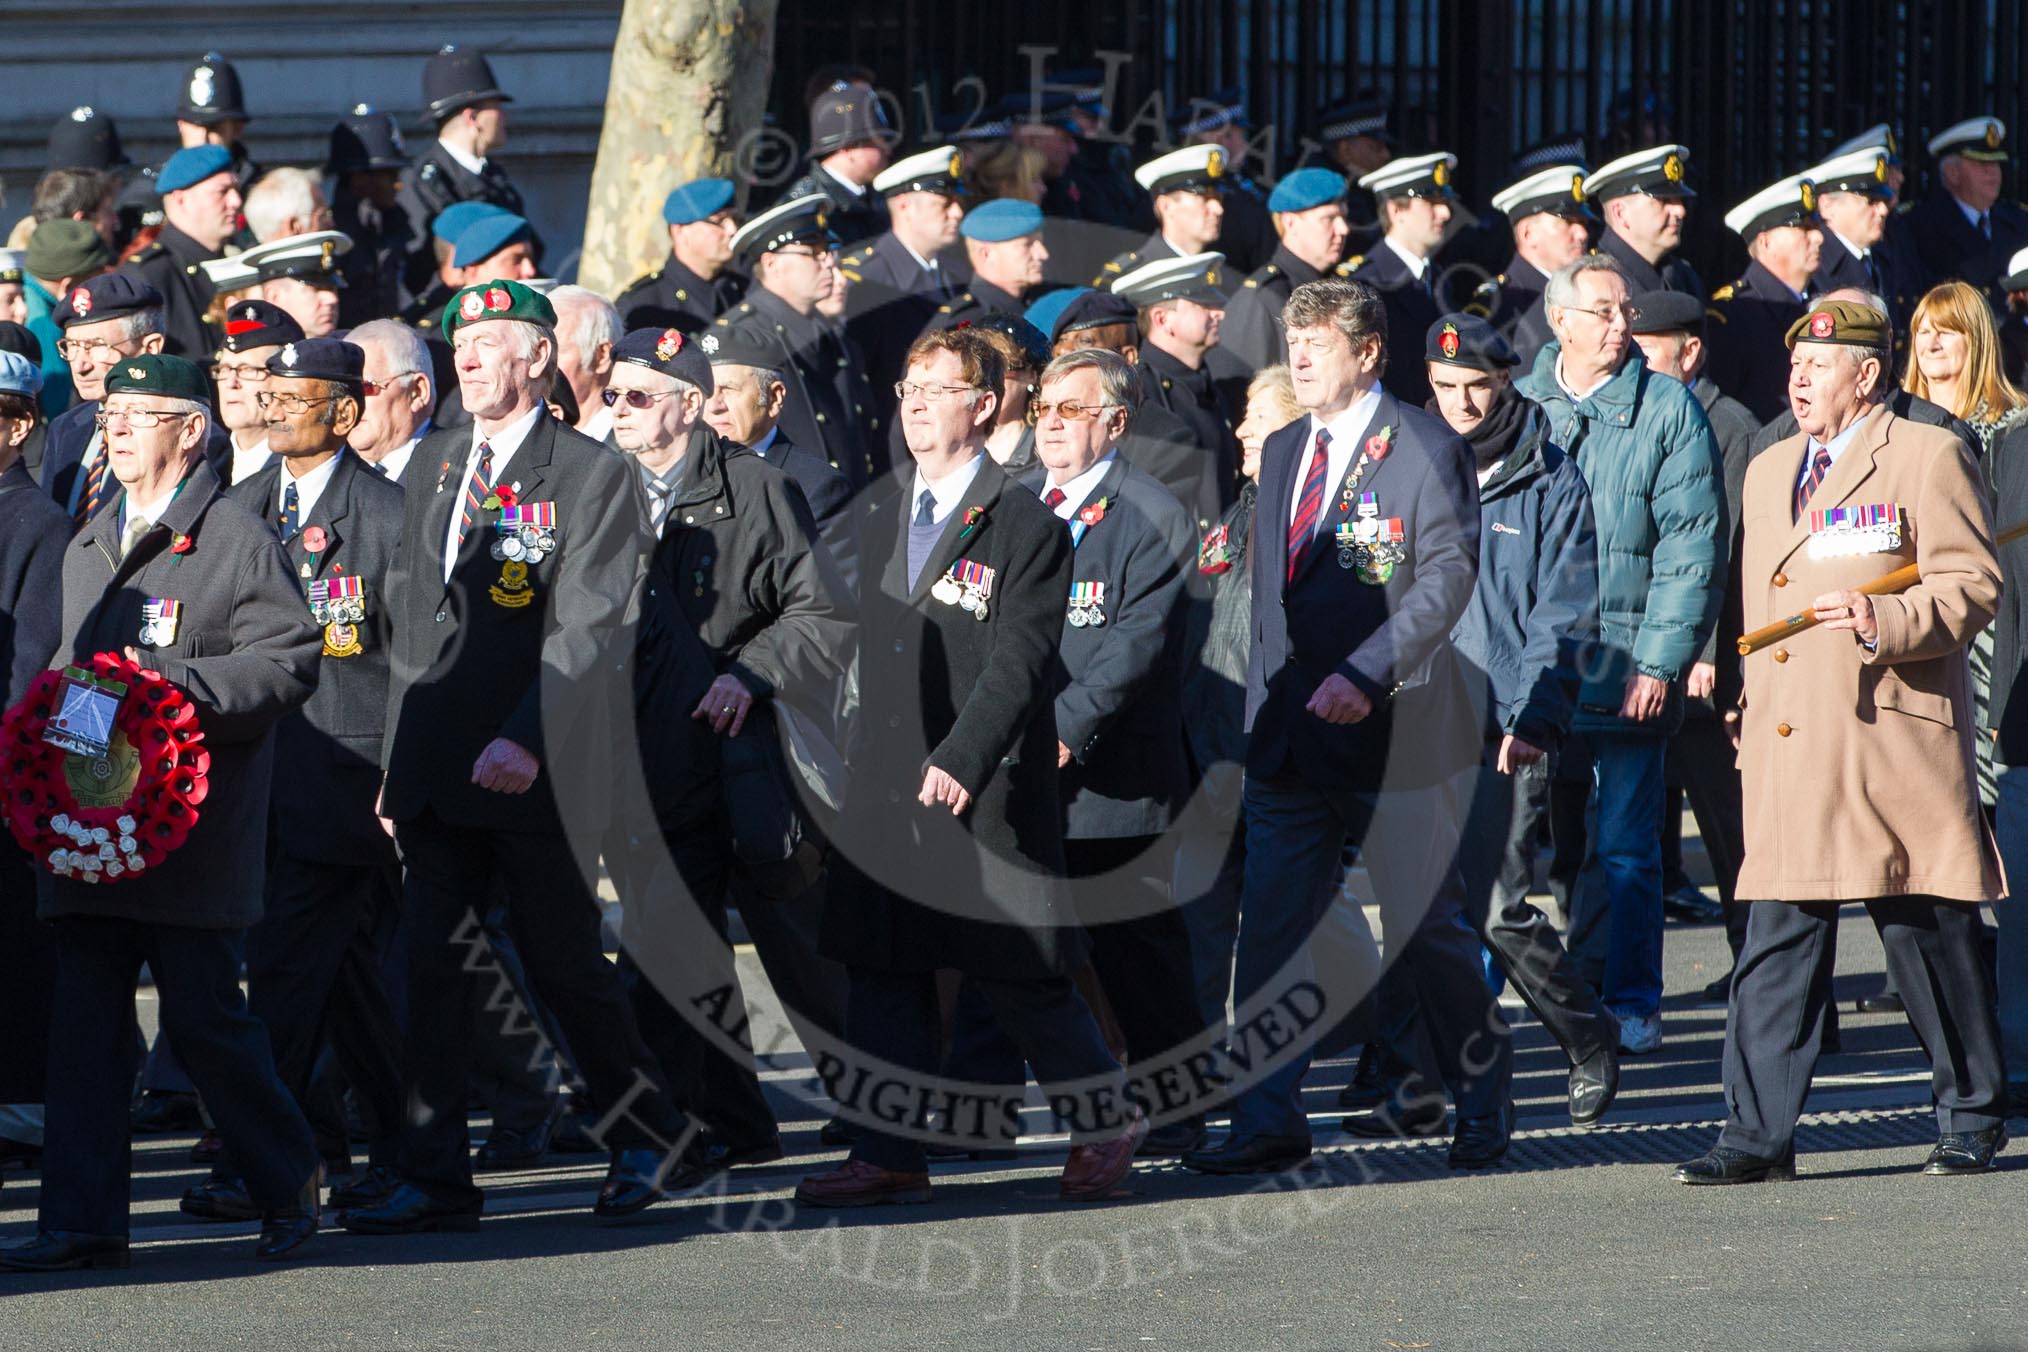 Remembrance Sunday 2012 Cenotaph March Past: Group F2 - Aden Veterans Association..
Whitehall, Cenotaph,
London SW1,

United Kingdom,
on 11 November 2012 at 11:45, image #393